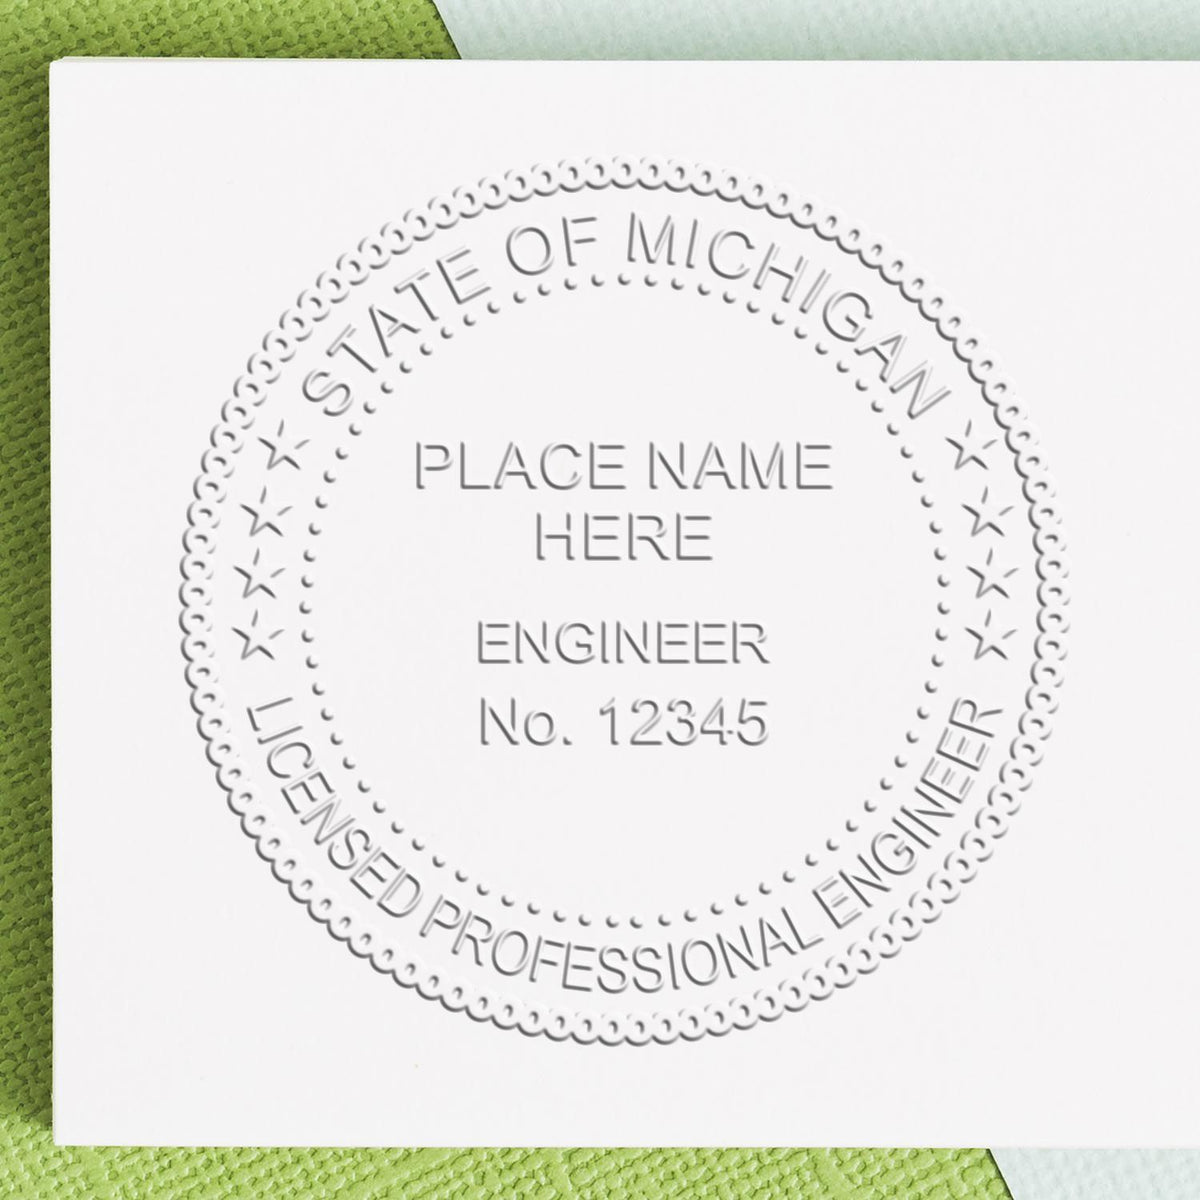 A stamped impression of the Soft Michigan Professional Engineer Seal in this stylish lifestyle photo, setting the tone for a unique and personalized product.